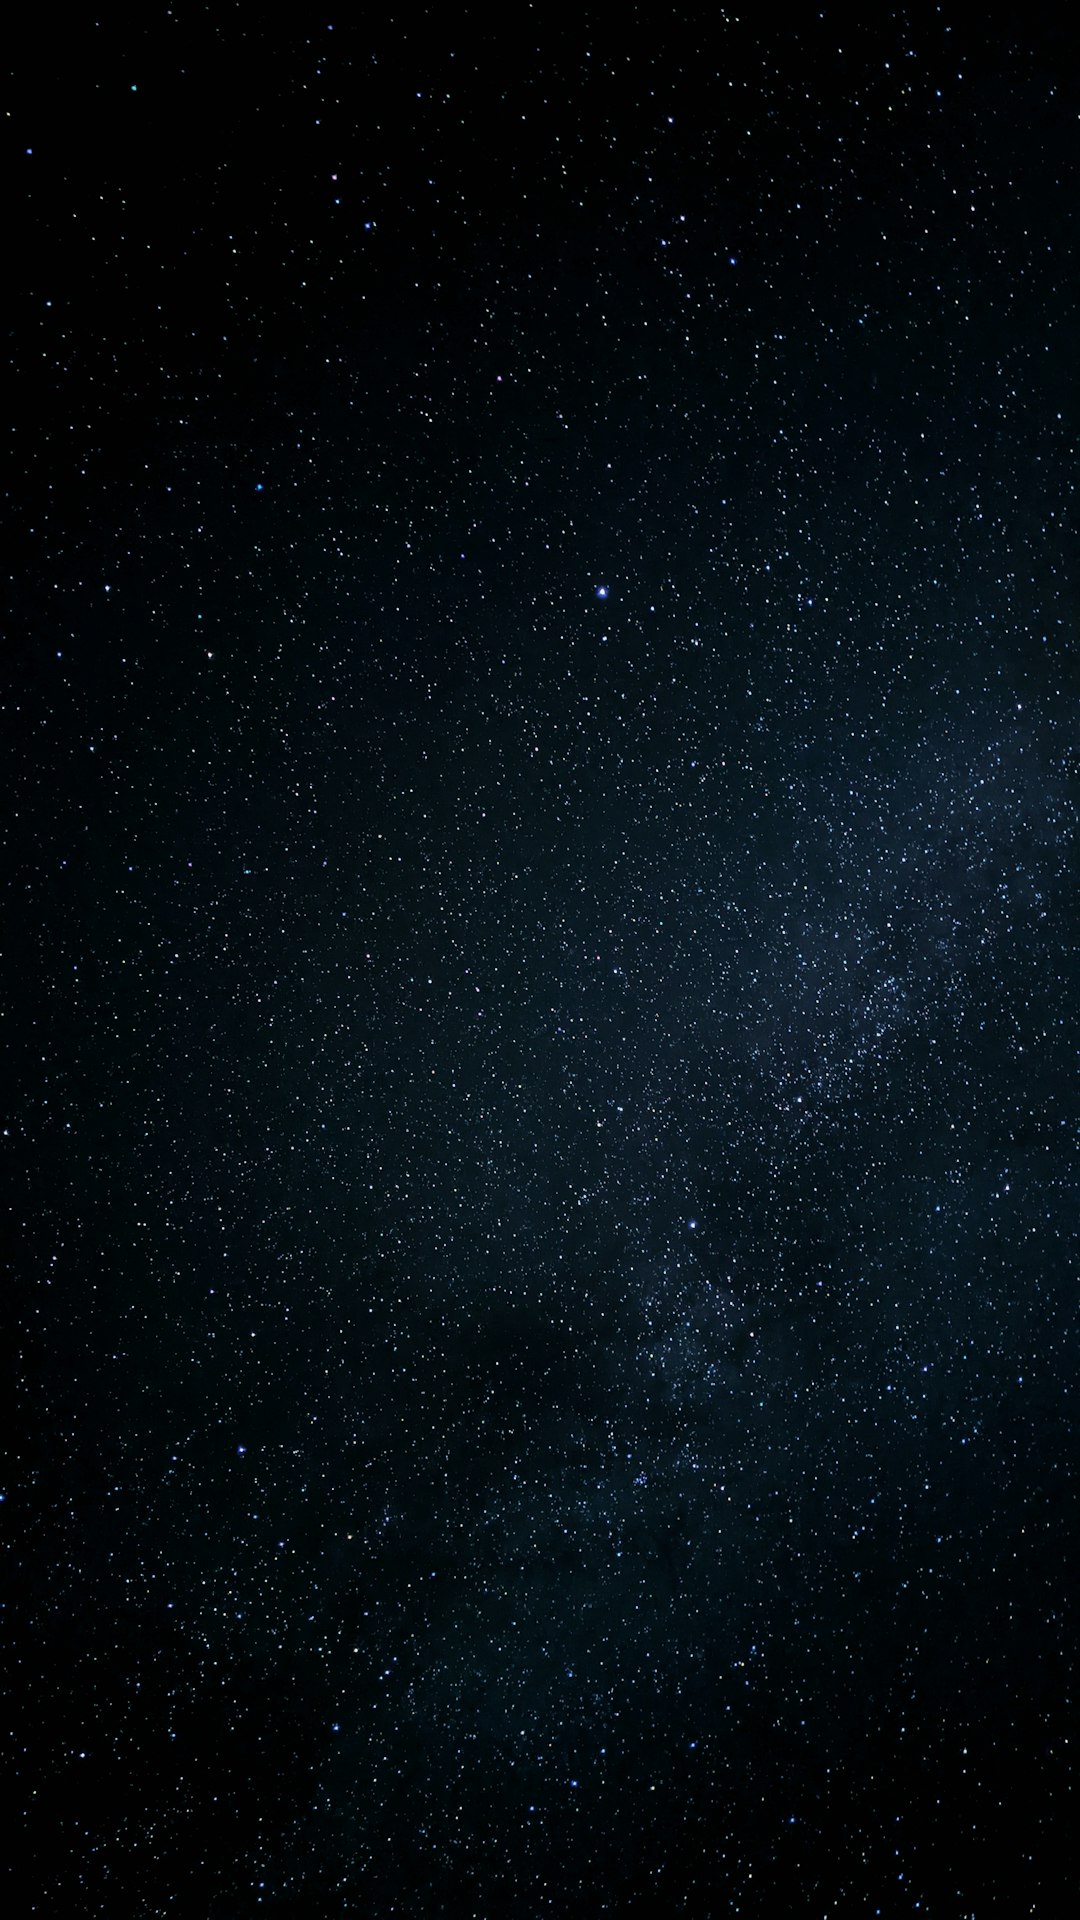 stars in the sky during night time photo – Free Black Image on Unsplash